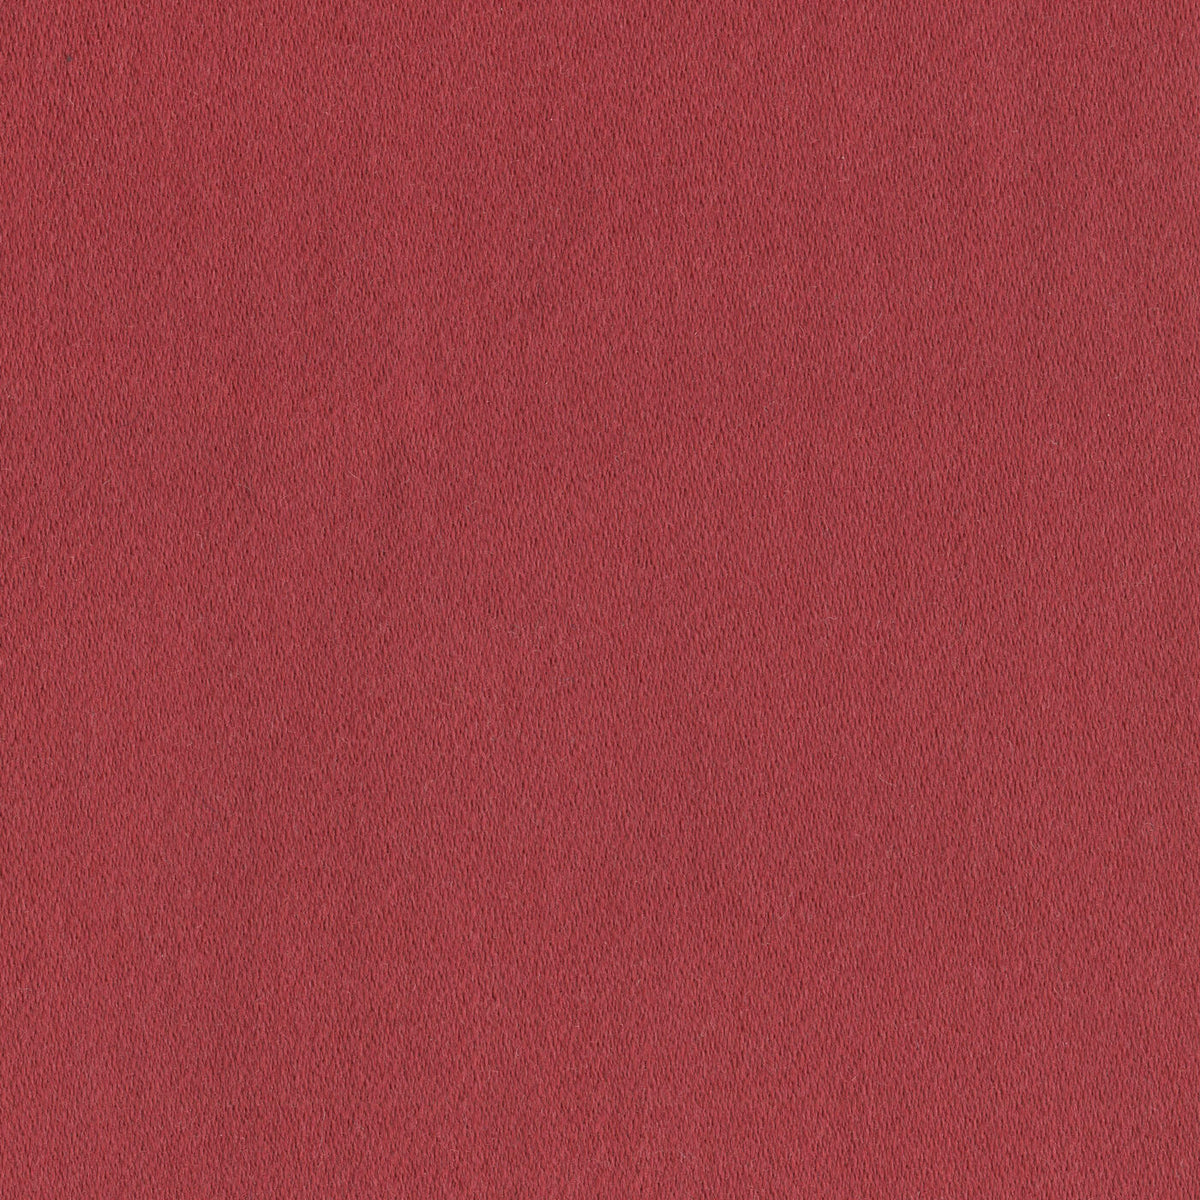 Manchester Wool 953337 Passion Red